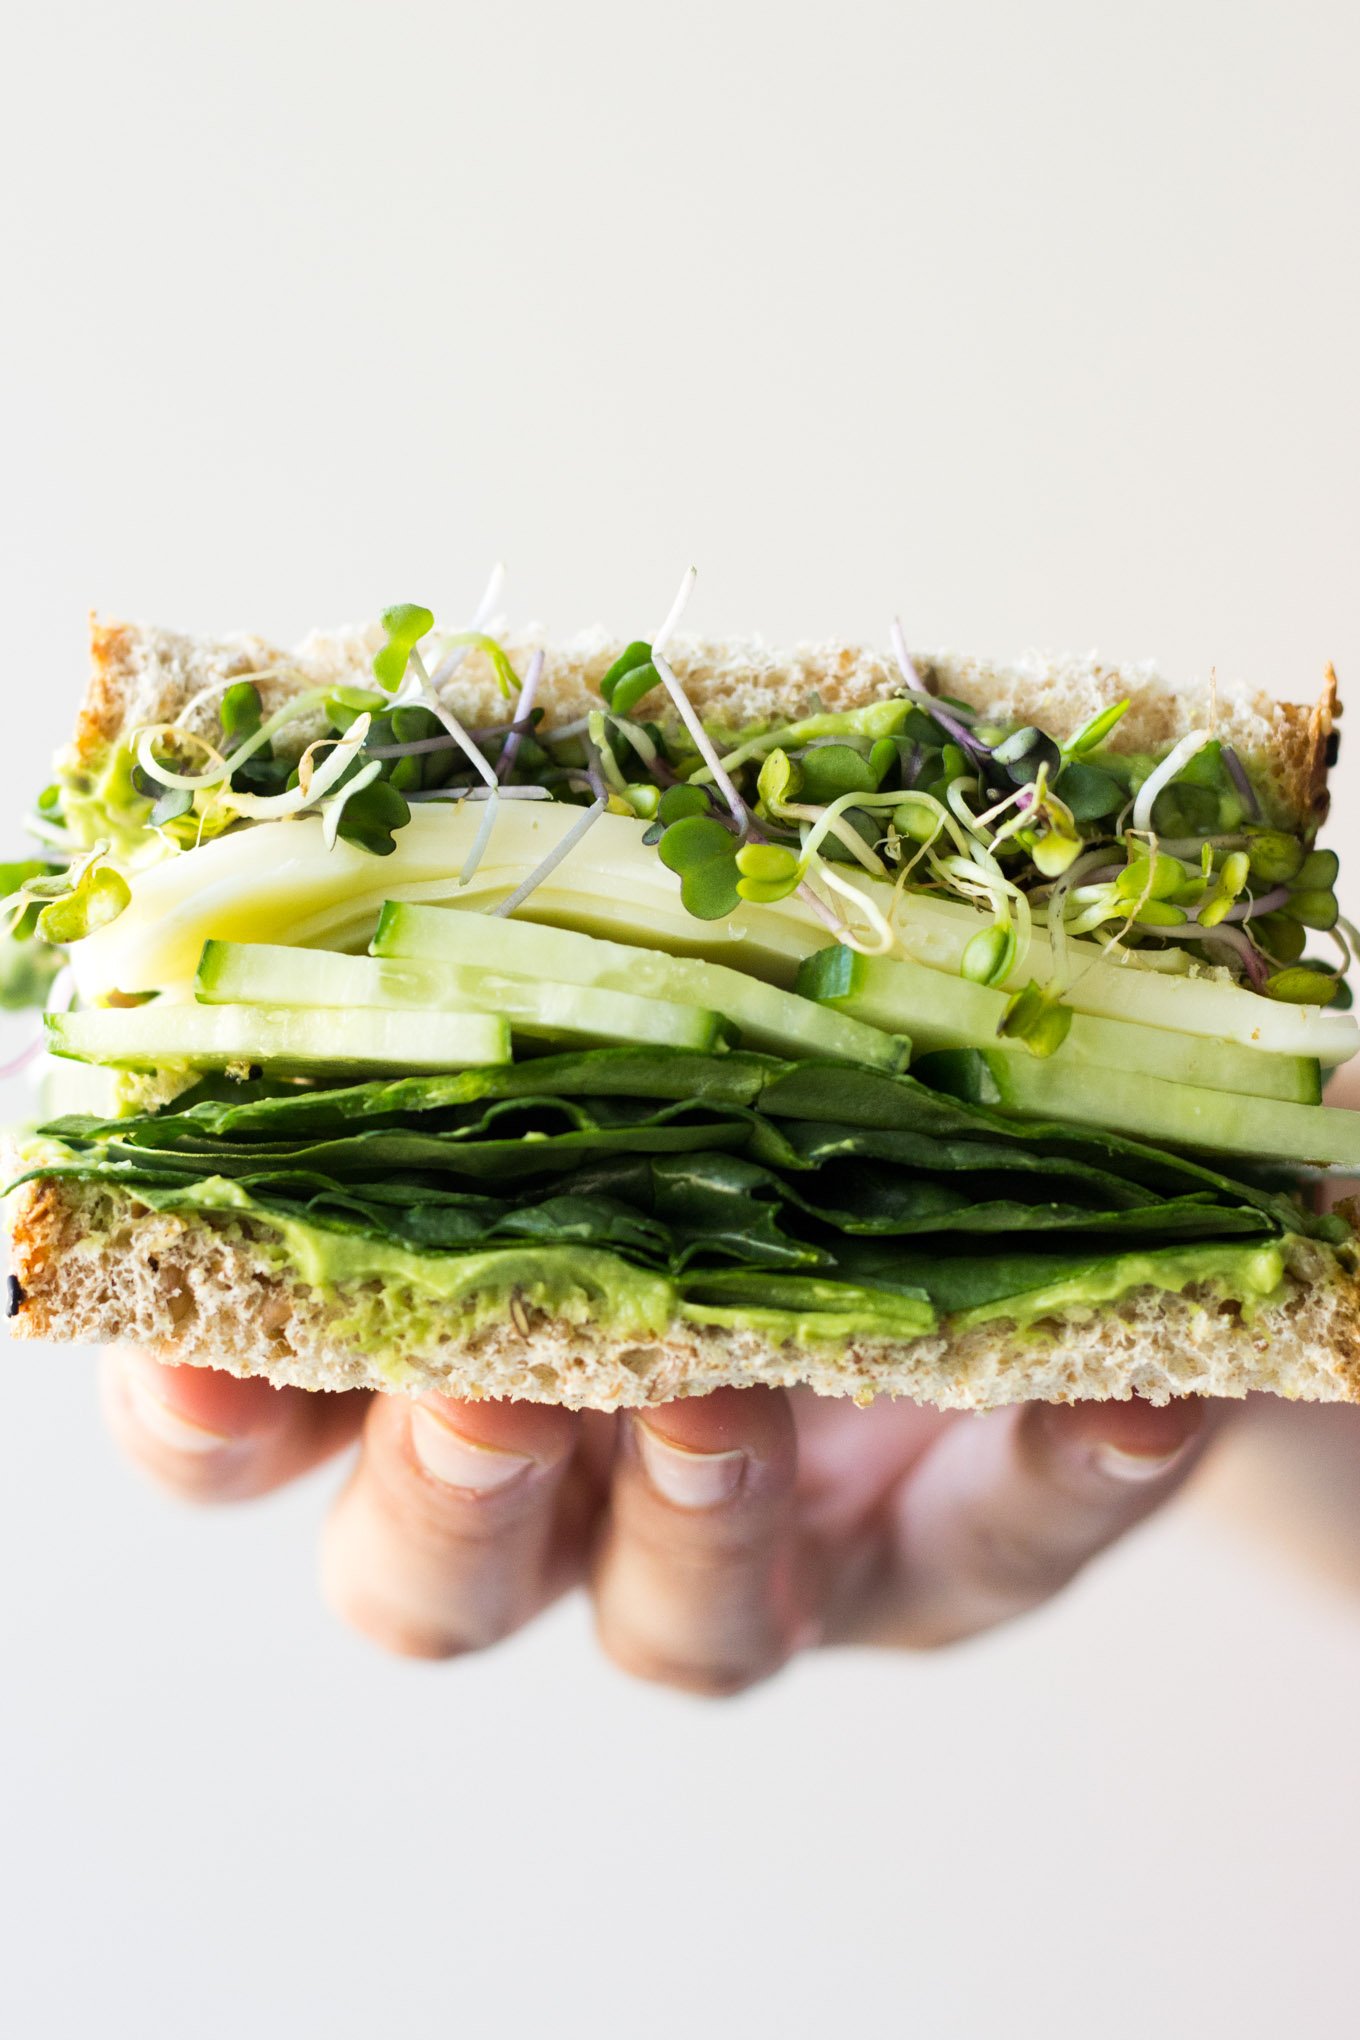 Hand holding vegetarian sandwich with layers of microgreens, cucumber, cheese, spinach, and avocado.